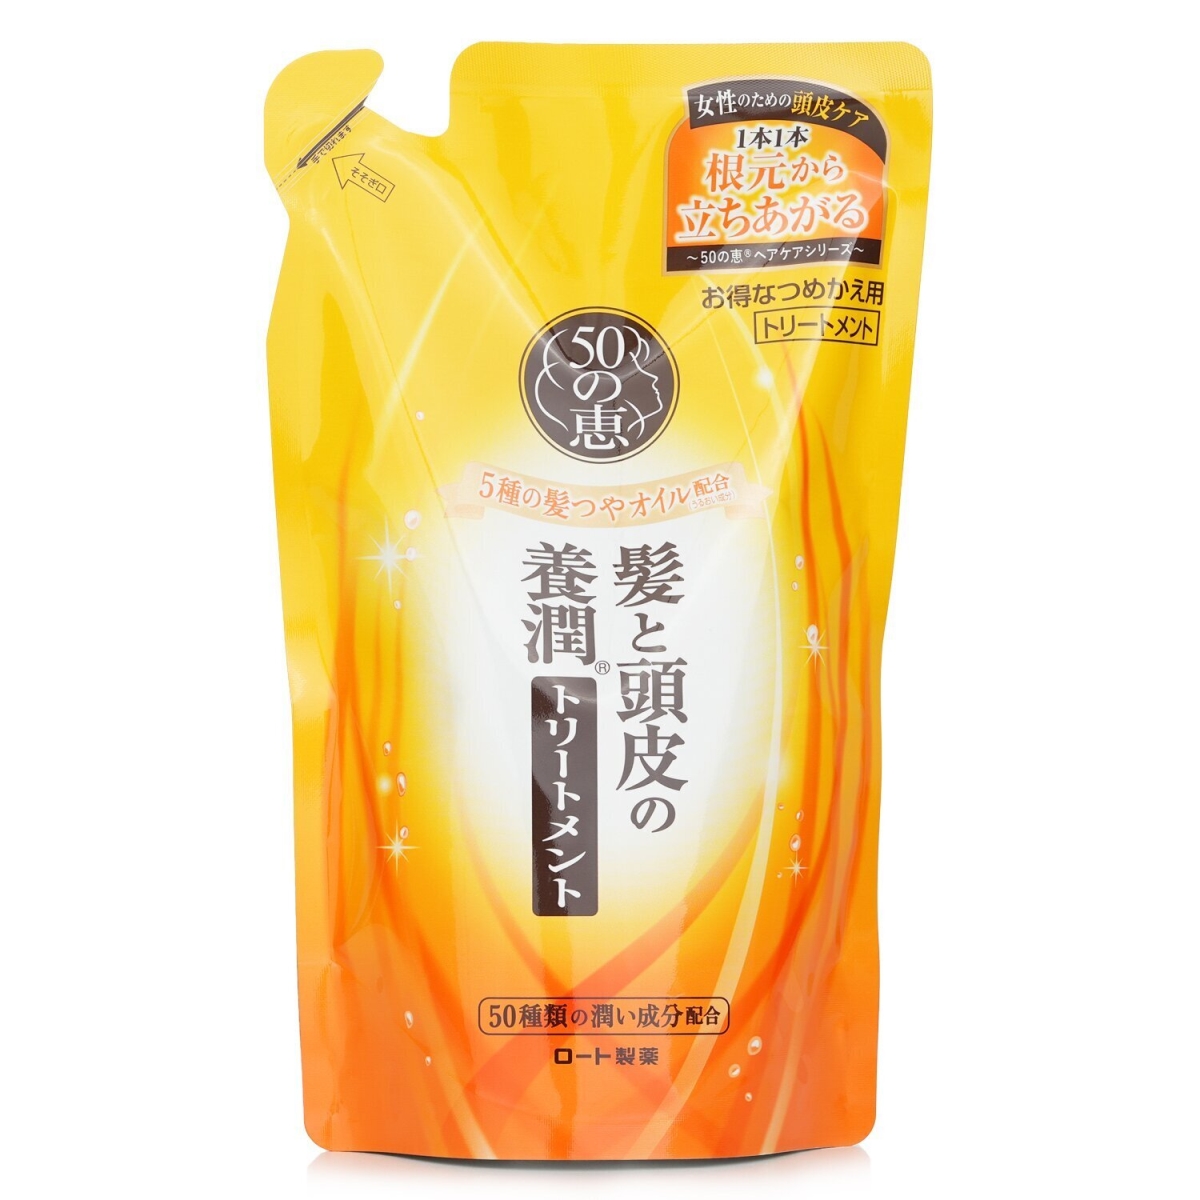 Picture of 50 Megumi 298599 330 ml Aging Hair Care Conditioner Refill